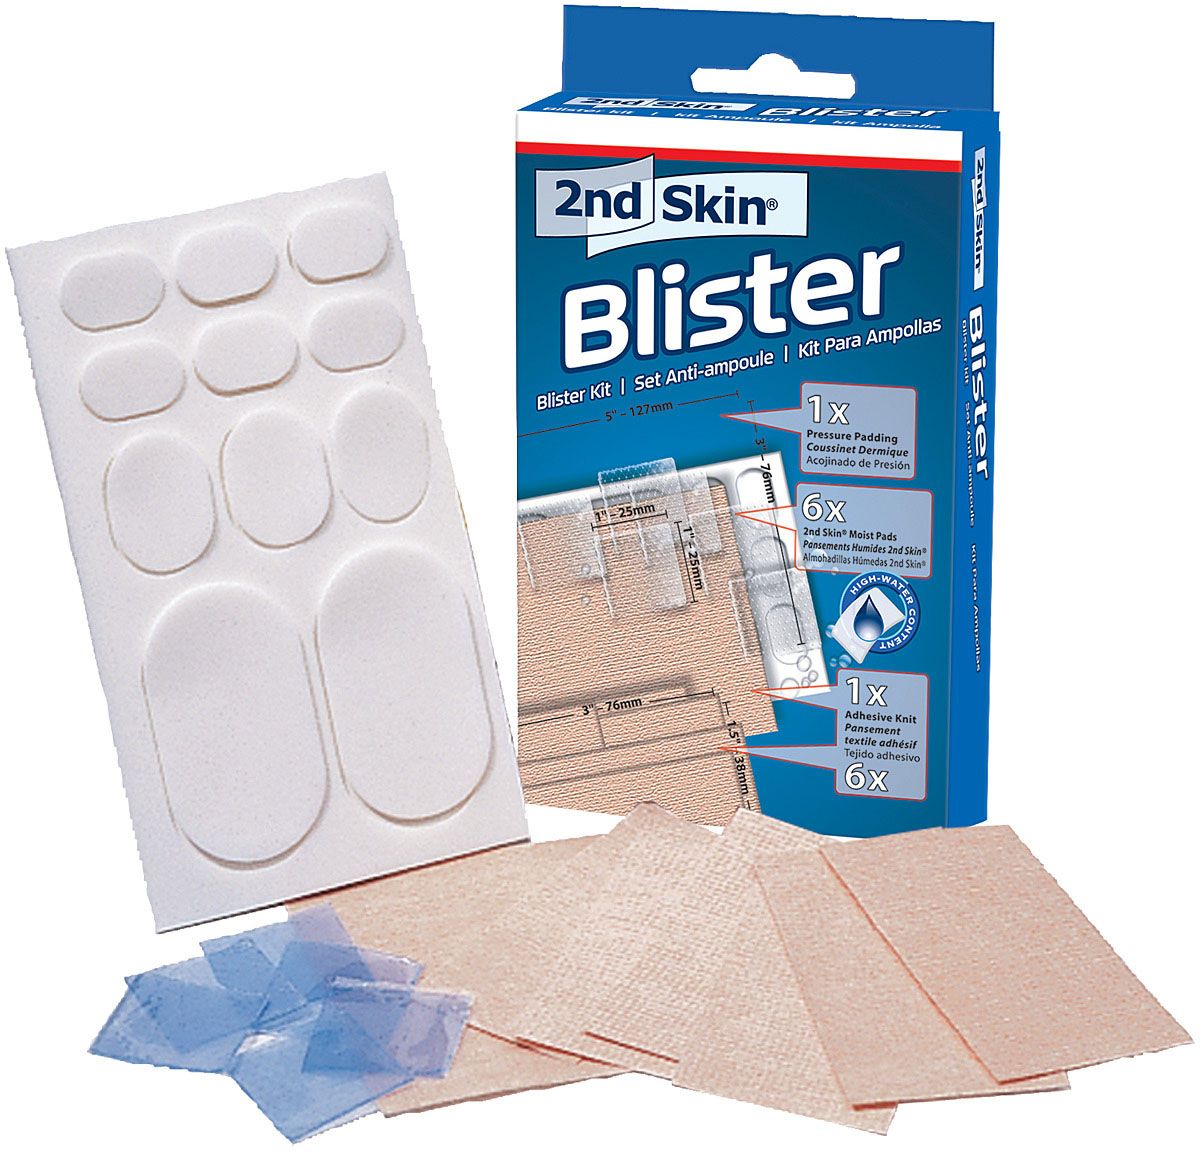 spenco 2nd skin blister kit for protection against friction, pressure and blisters.